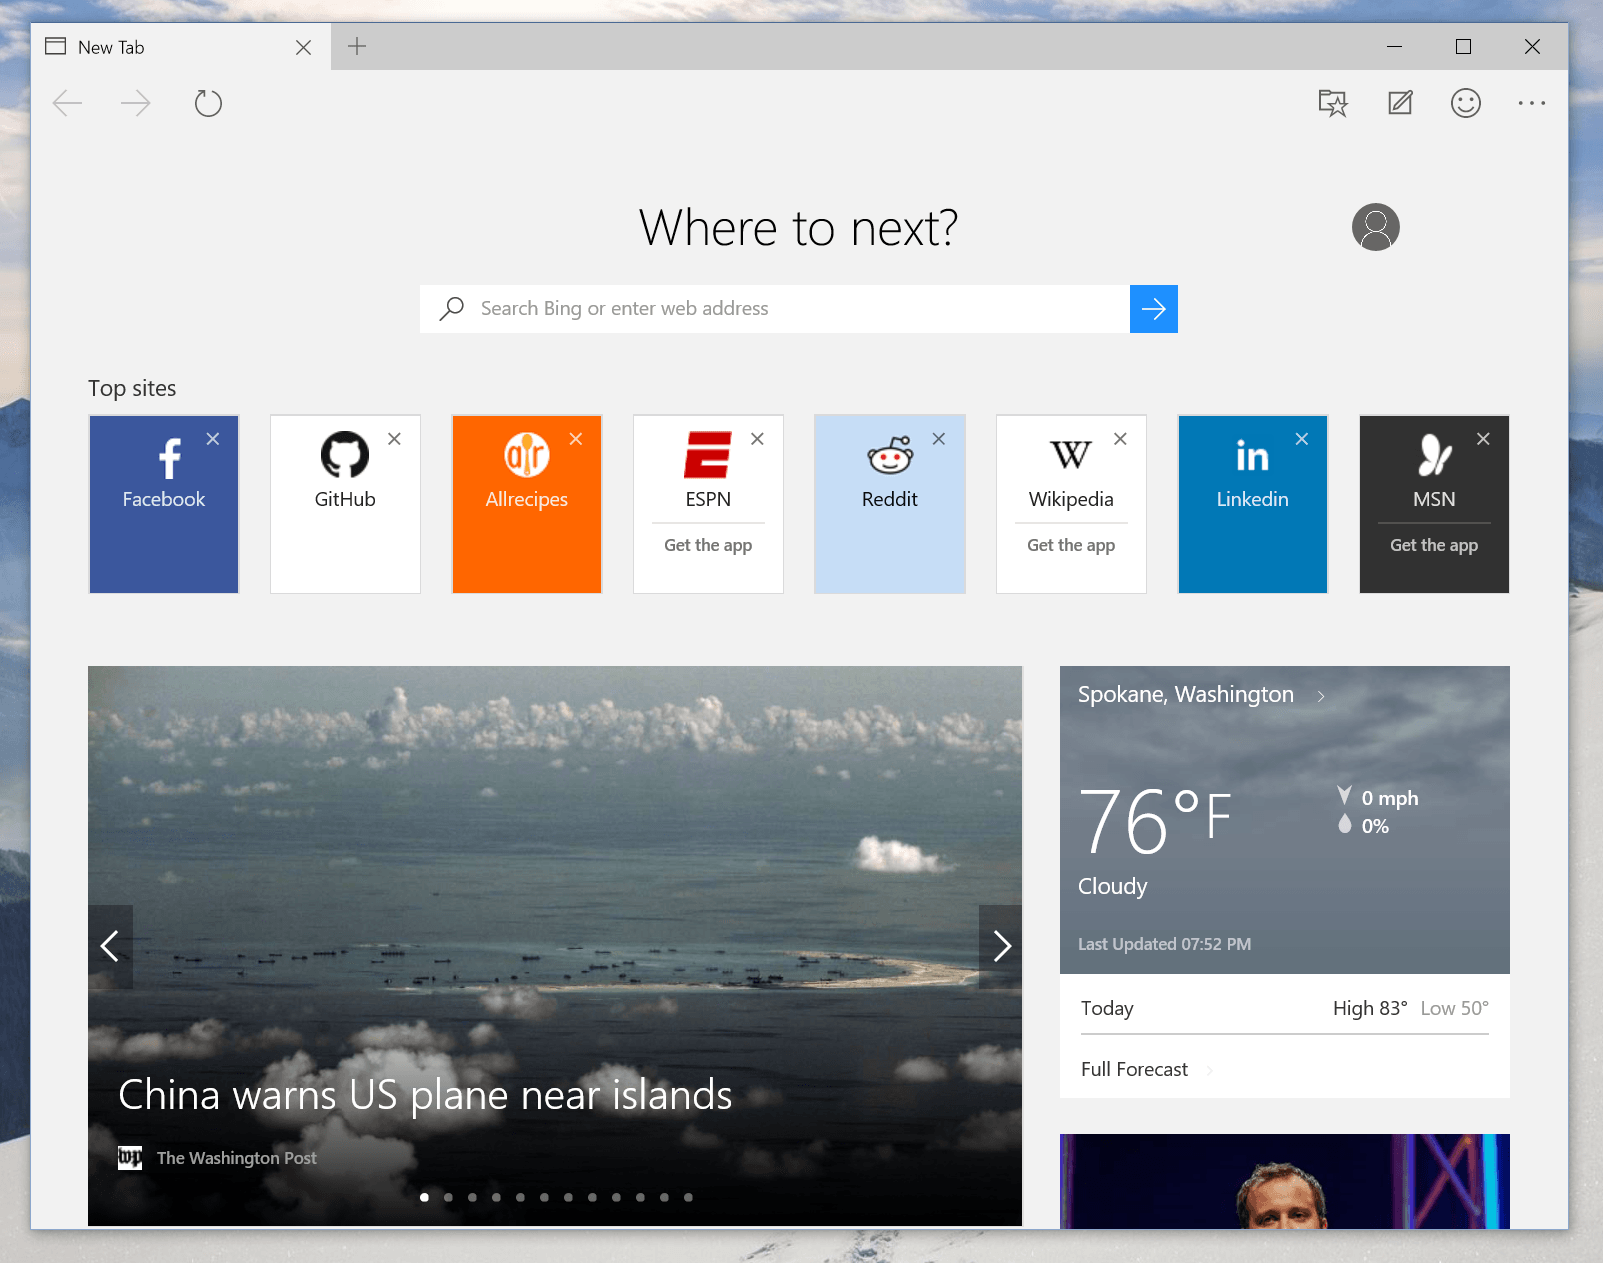 Microsoft explain how the new "Sleeping tabs" feature works in Edge. edge_newtab_10122_1.png